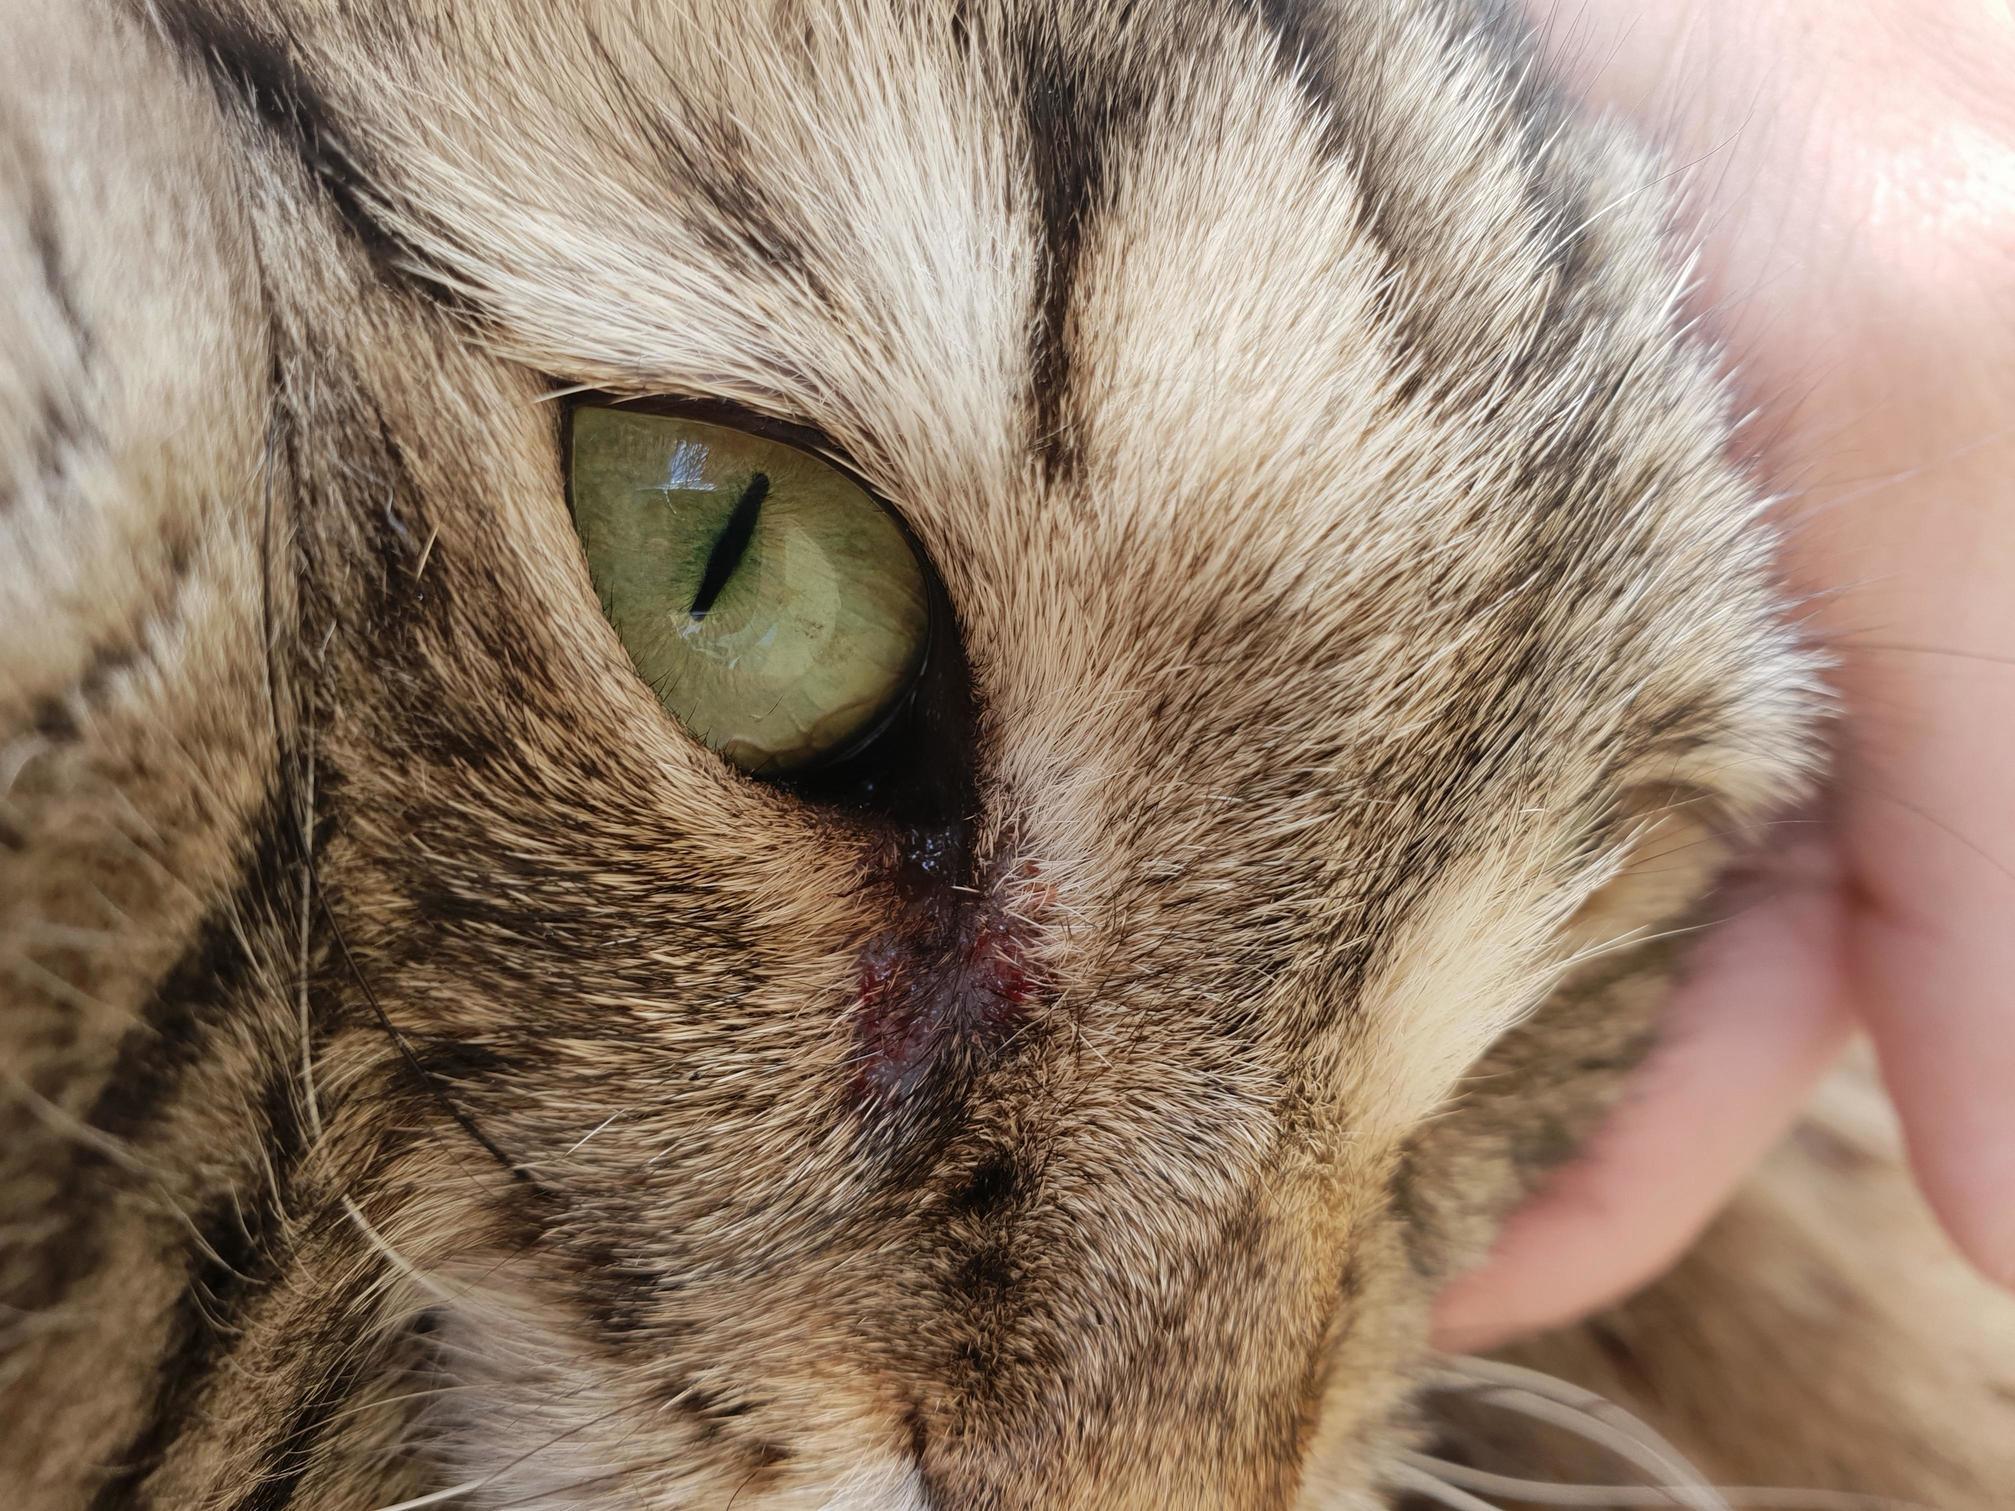 This morning, my cat struggled to open his right eye. now he has blood next to the eye. anyone knows why 